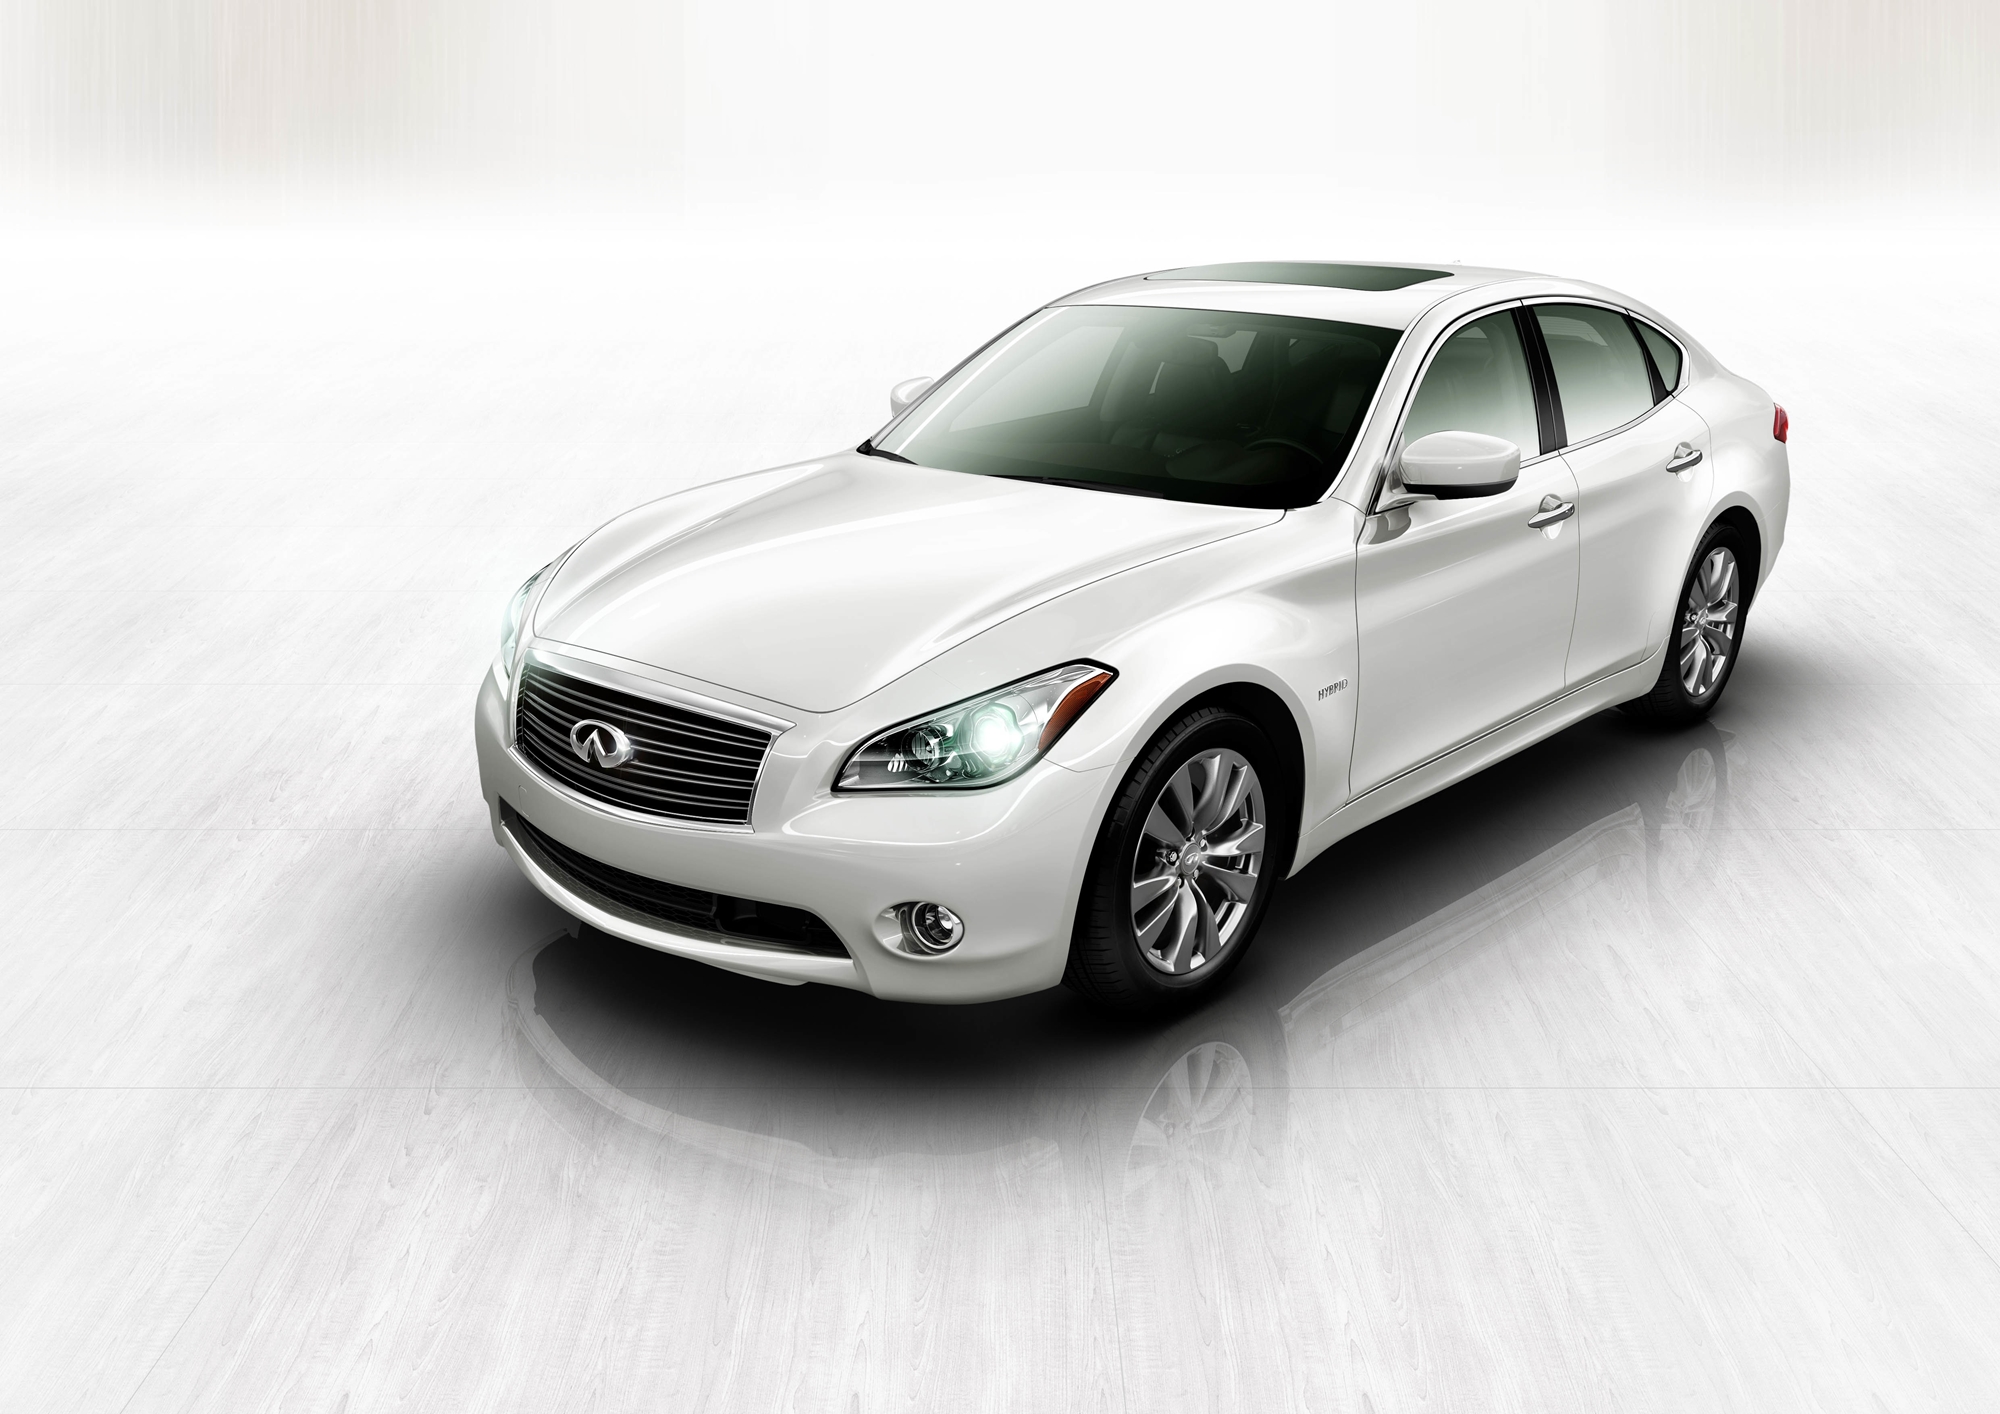 2011 Infiniti G25x Full Specs, Features and Price | CarBuzz